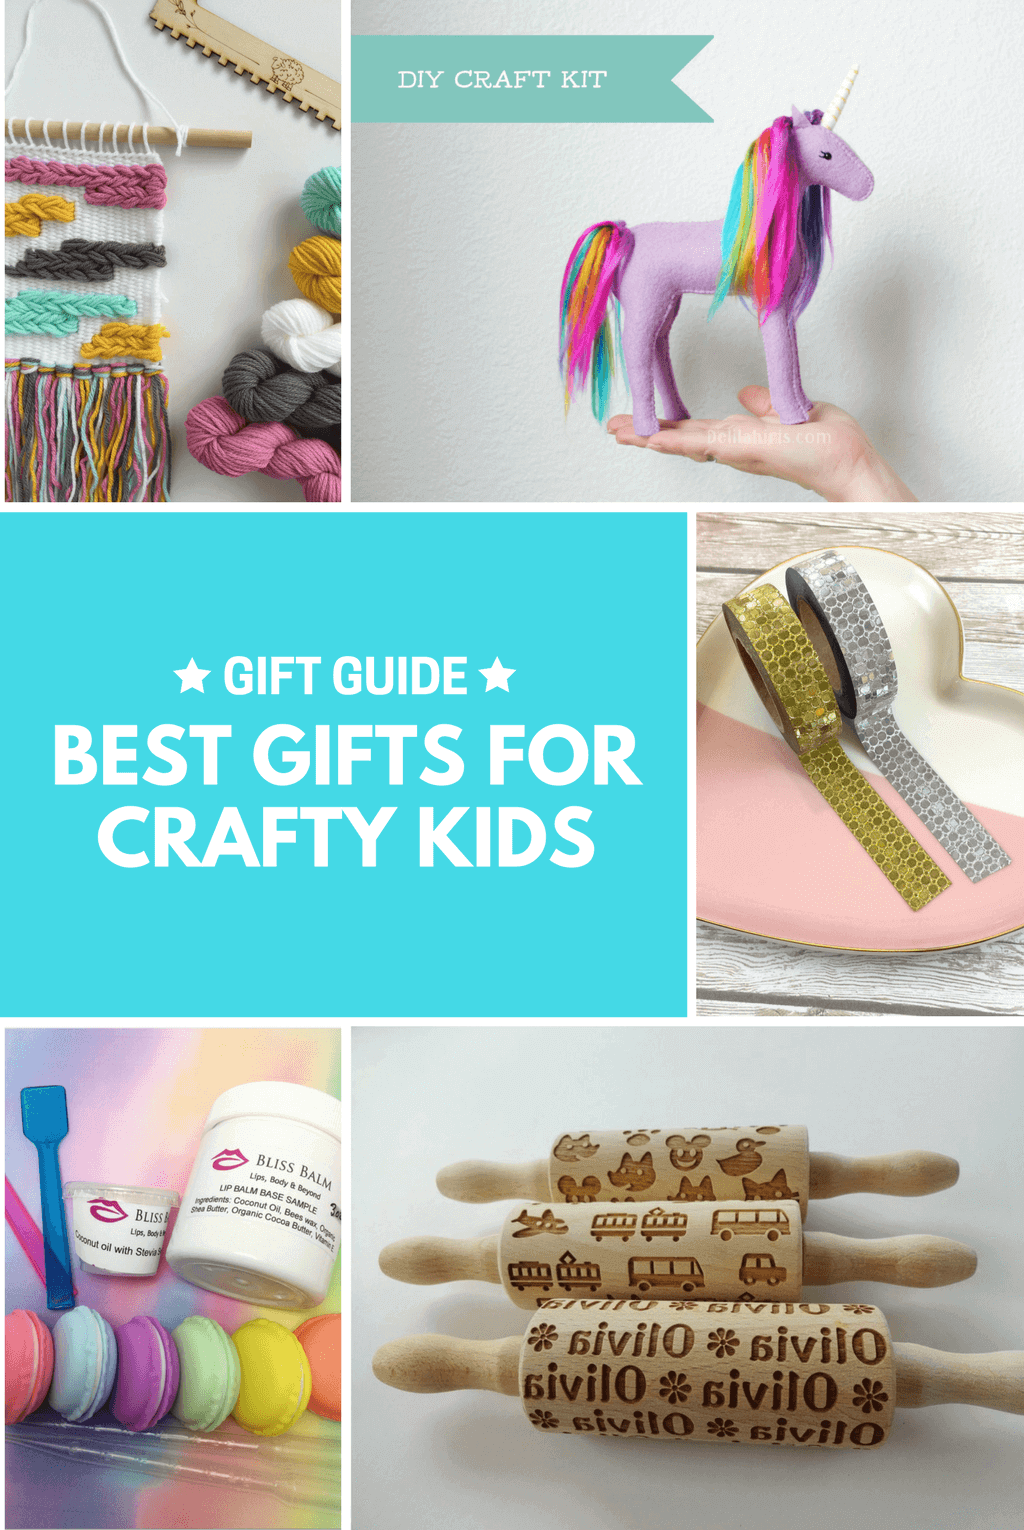 Best Gifts for Crafty Kids | Craft Gift Guide for ages 5-14 - creative kids gift ideas that help kids unleash their creativity! #giftguide #christmasgifts #kidsgifts #gifts #craftkits